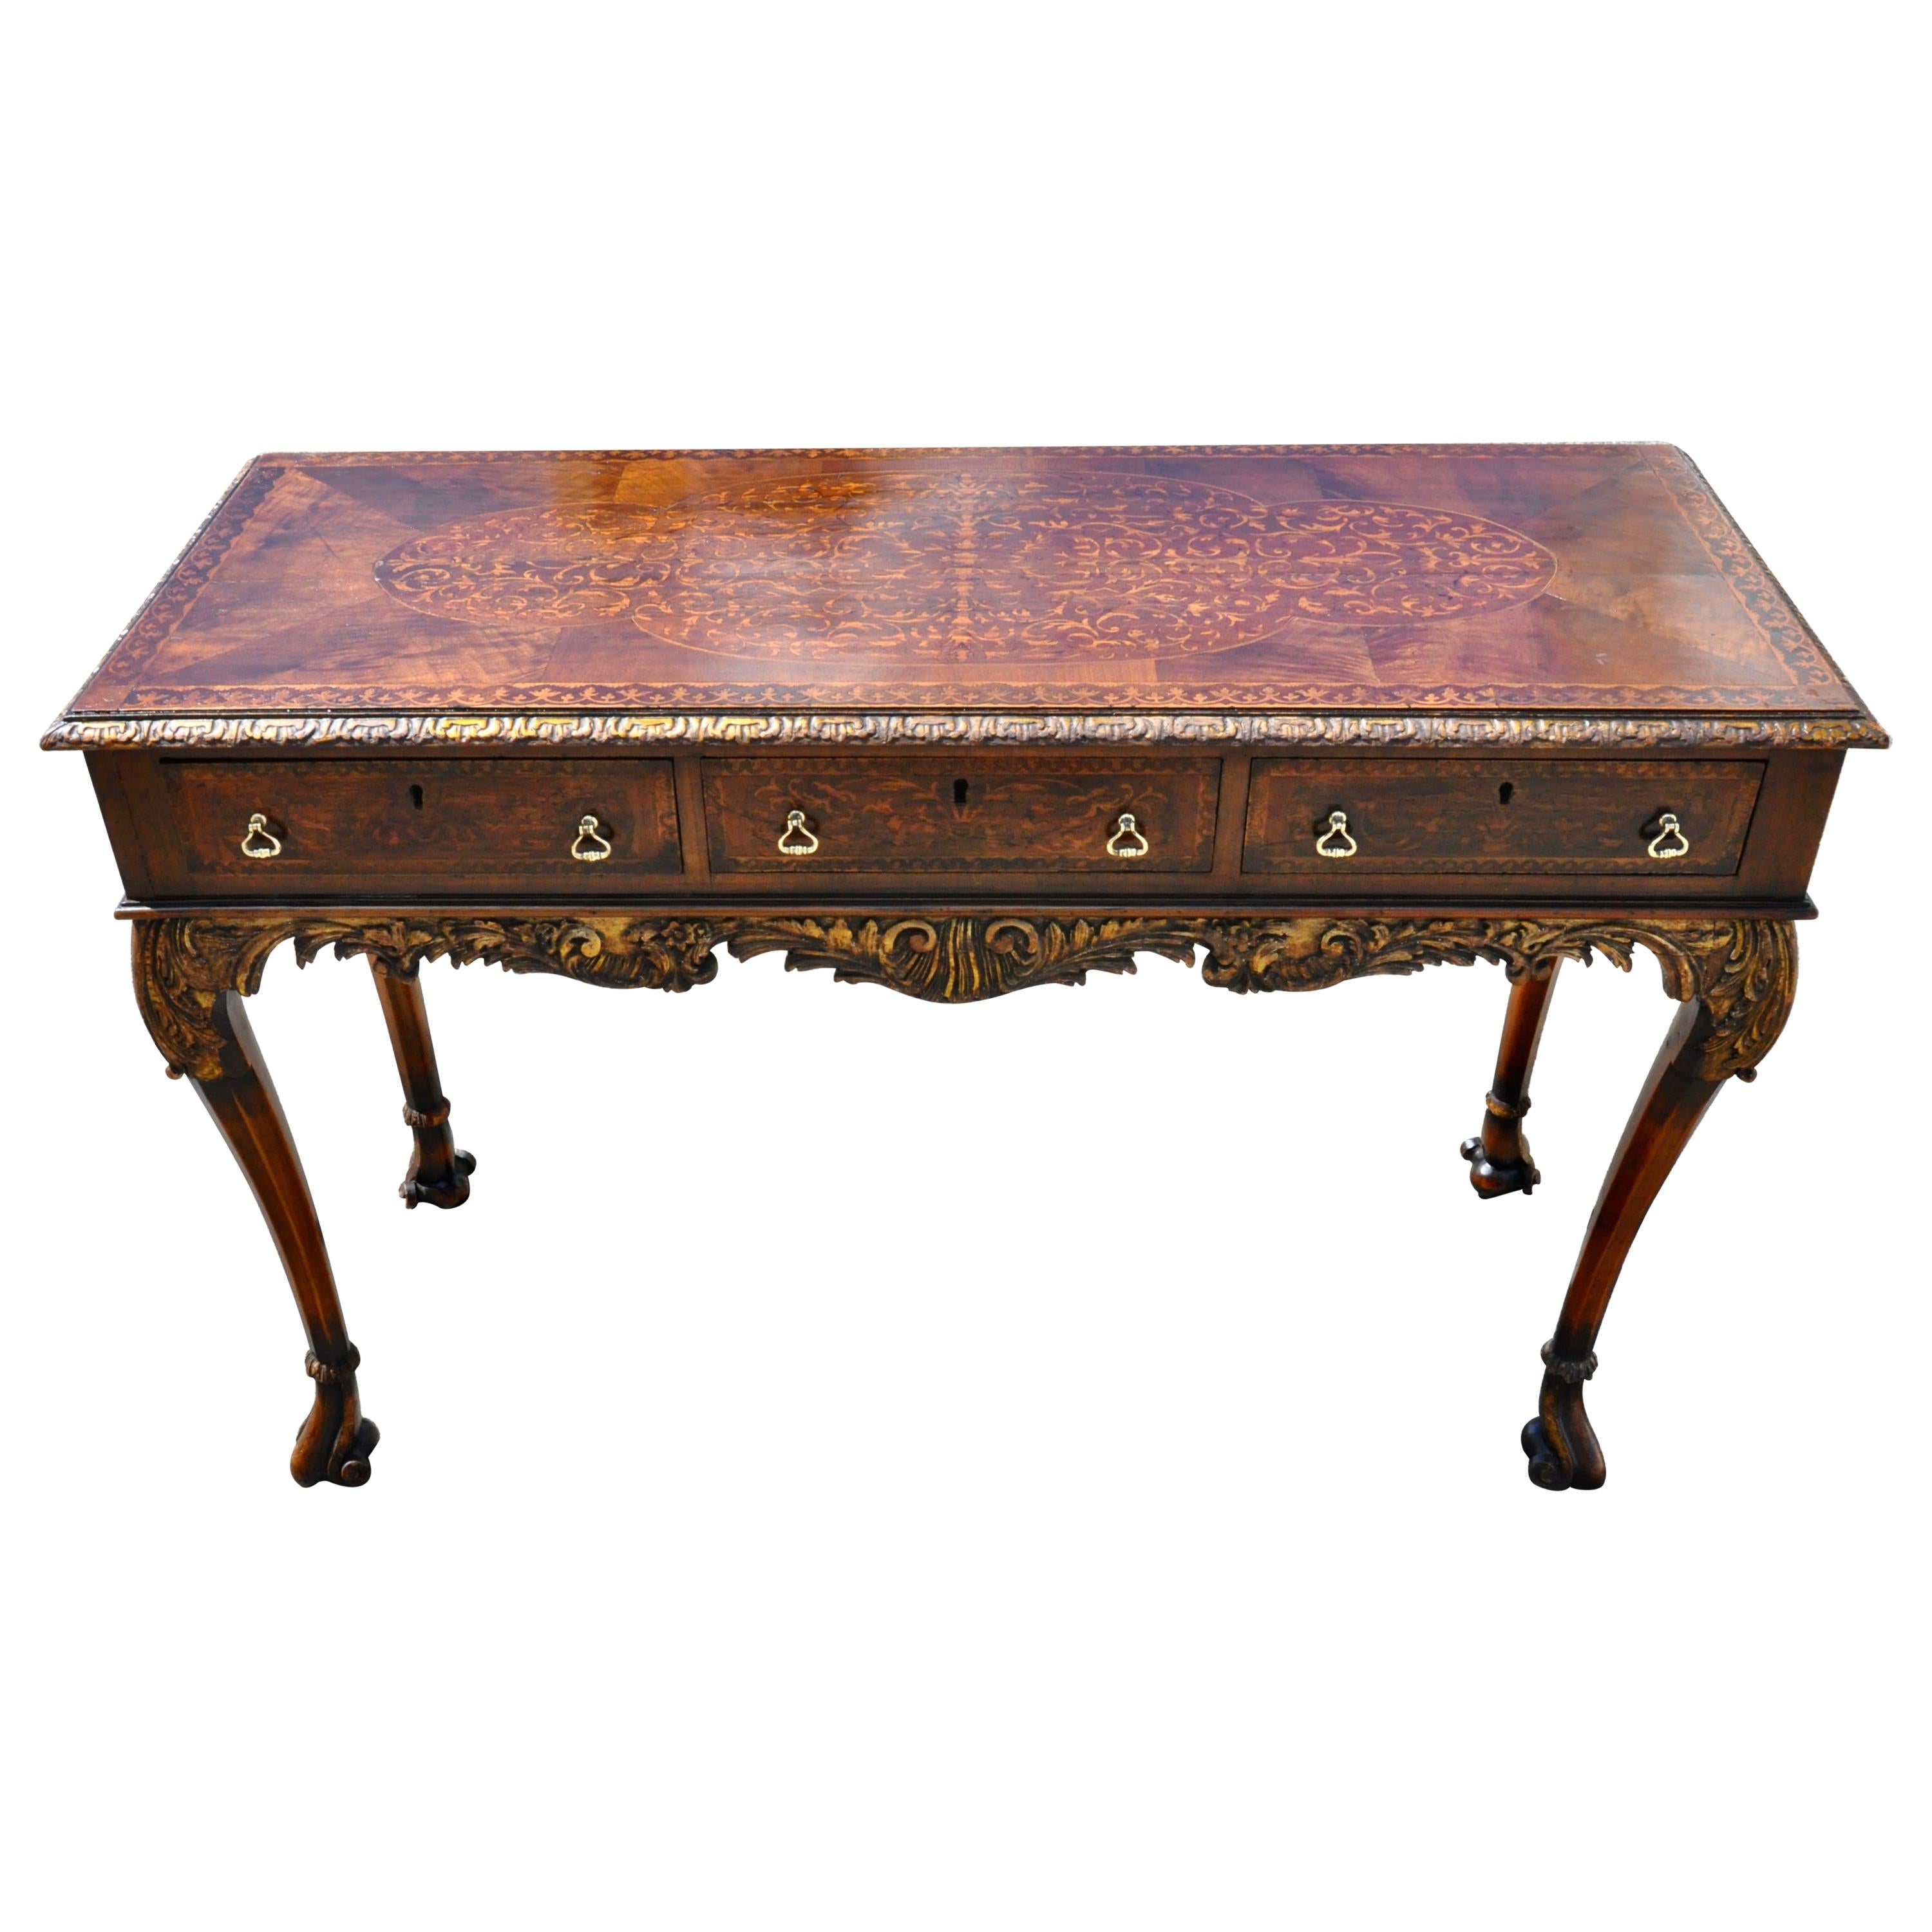 George II Style Seaweed Marquetry Inlaid Walnut Serving or Sofa Table